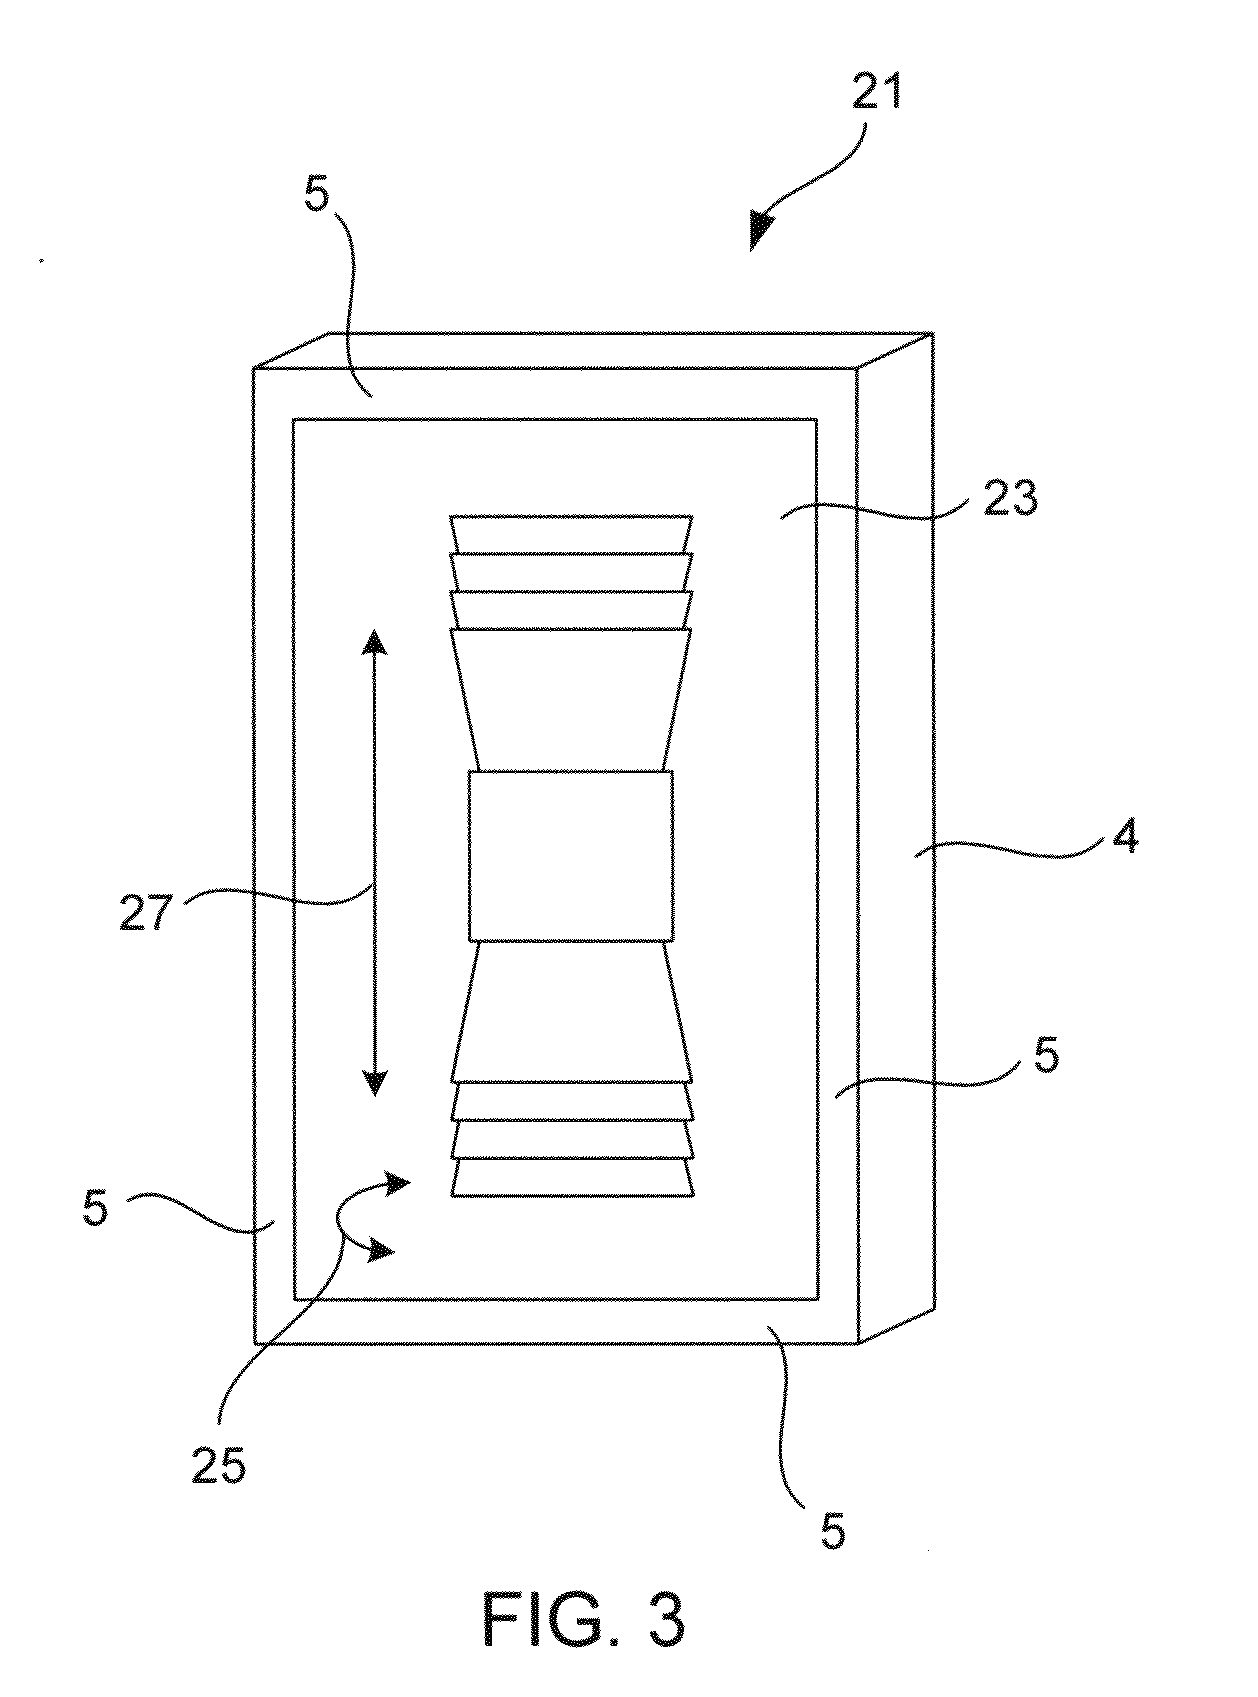 Electronic device with image based browsers